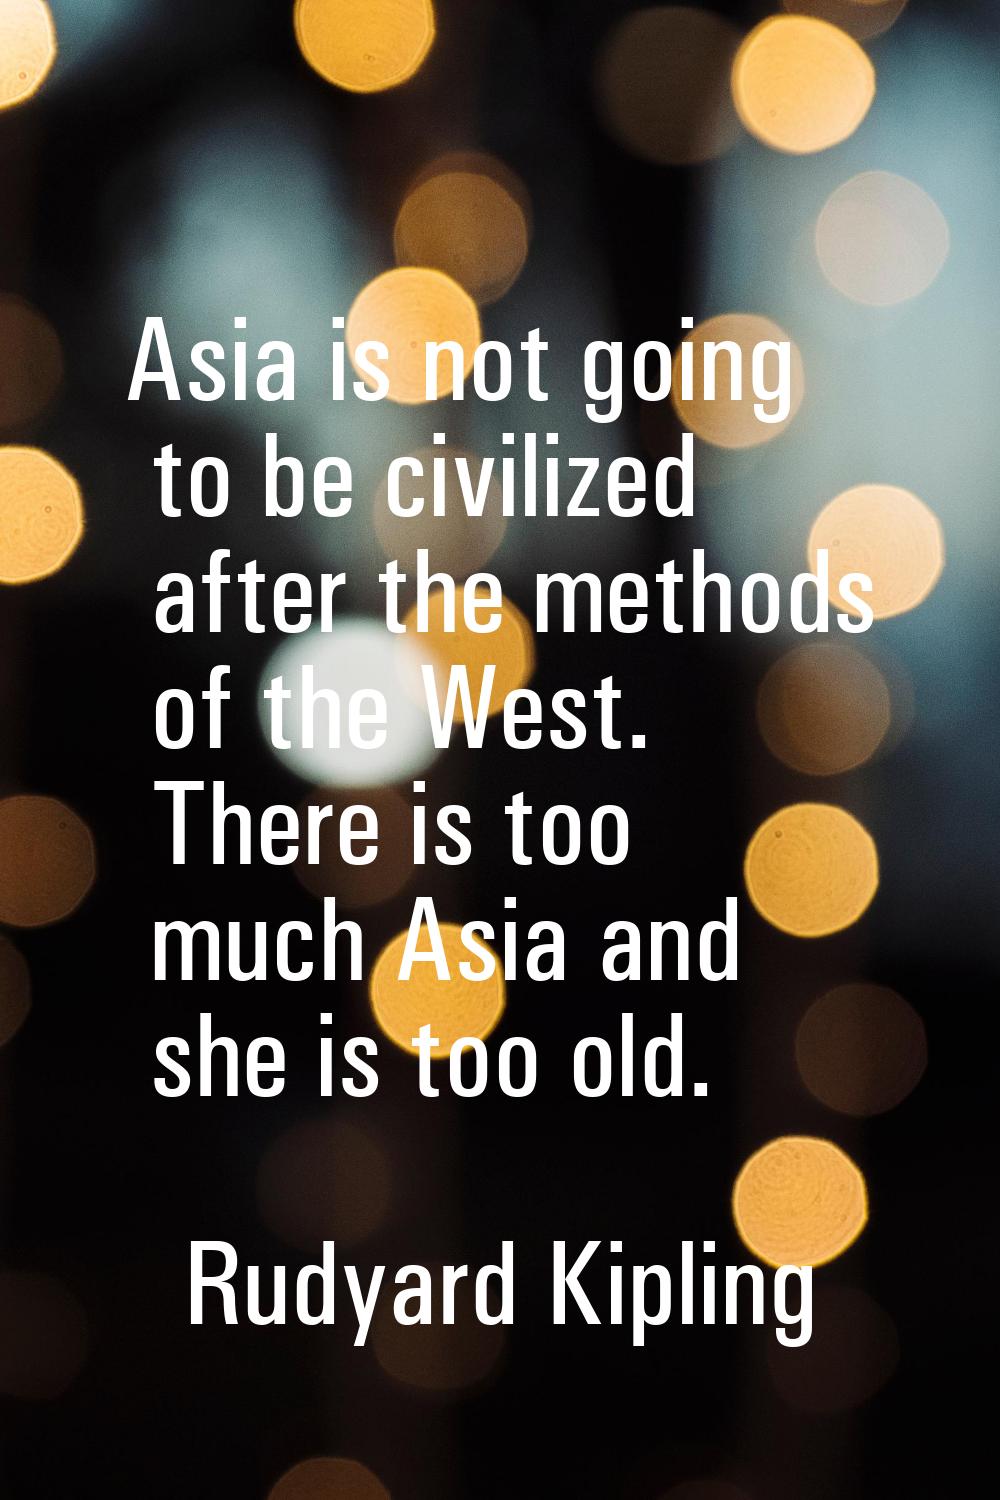 Asia is not going to be civilized after the methods of the West. There is too much Asia and she is 